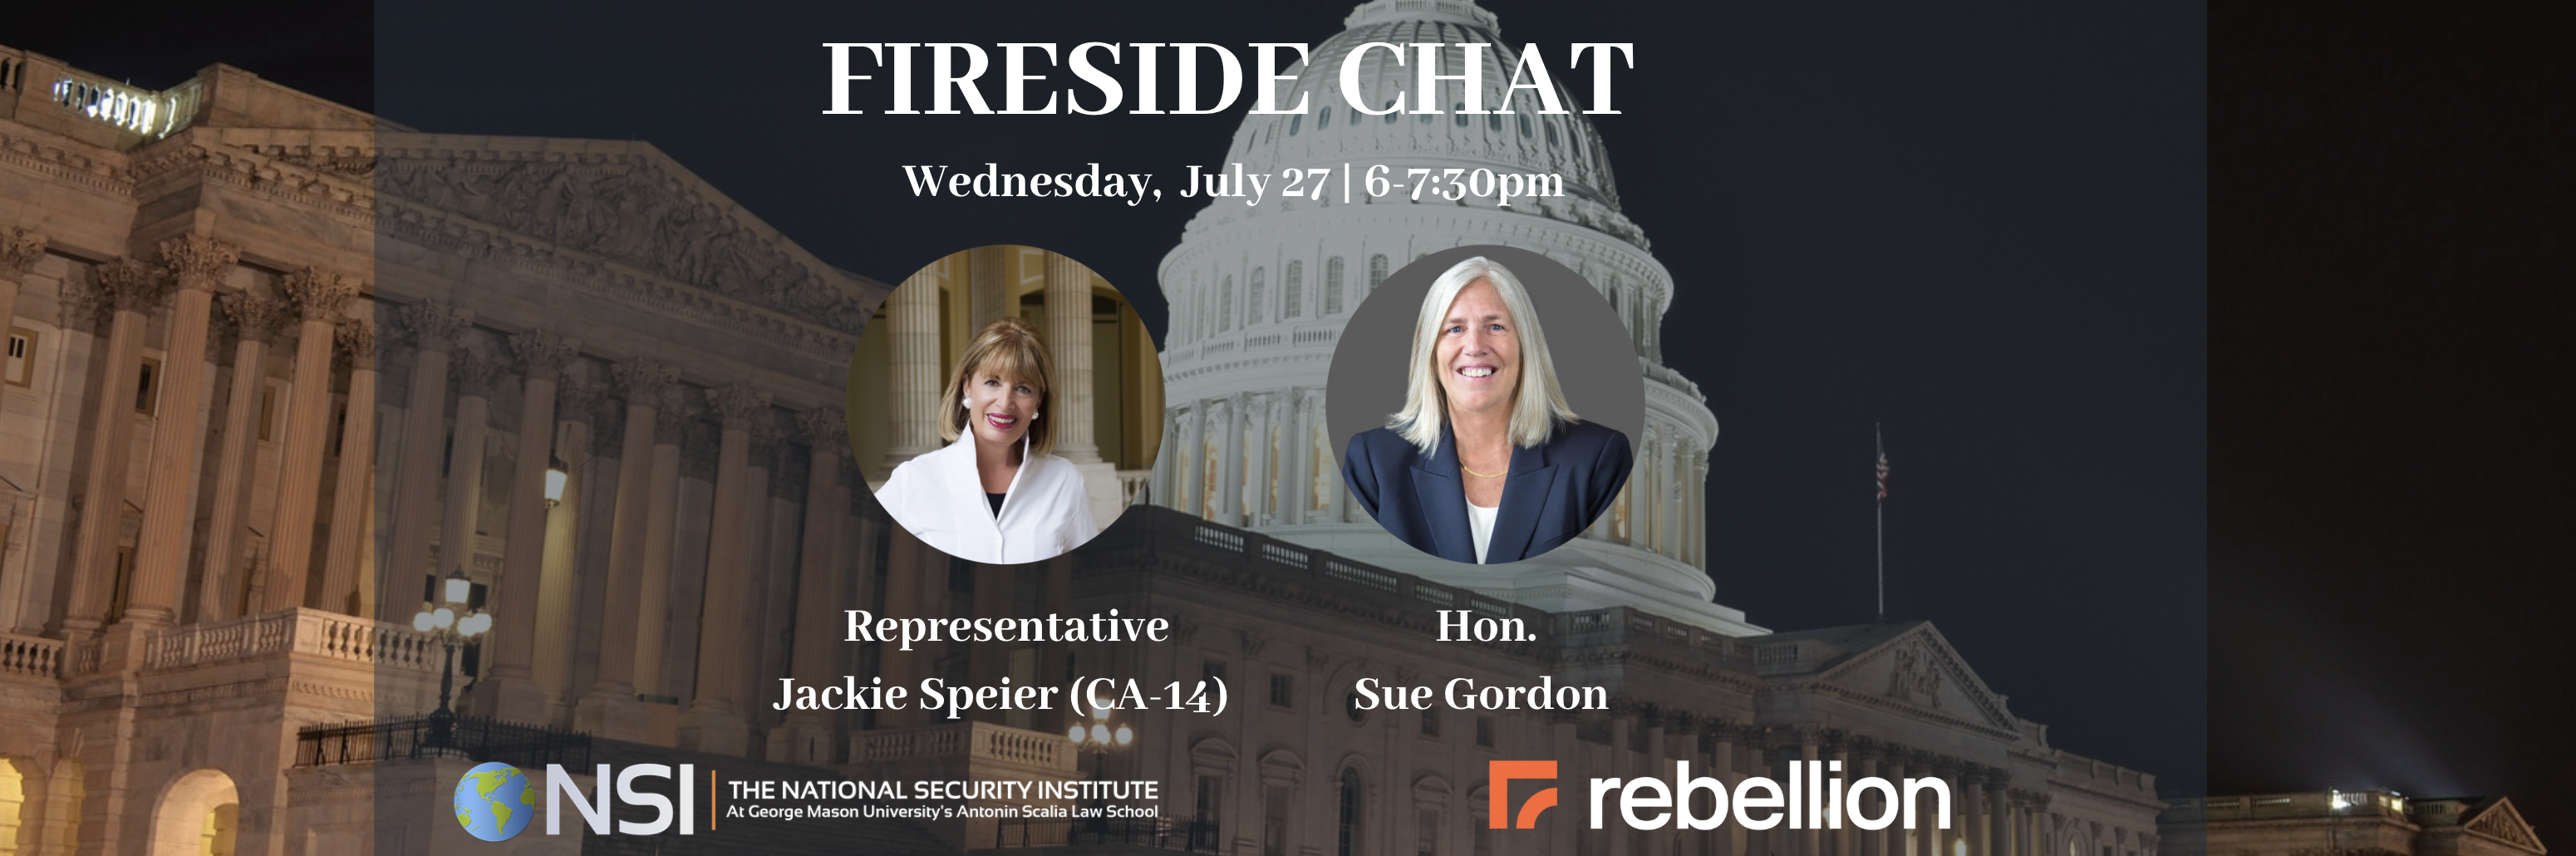 Fireside Chat with Jackie Speier and Sue Gordon